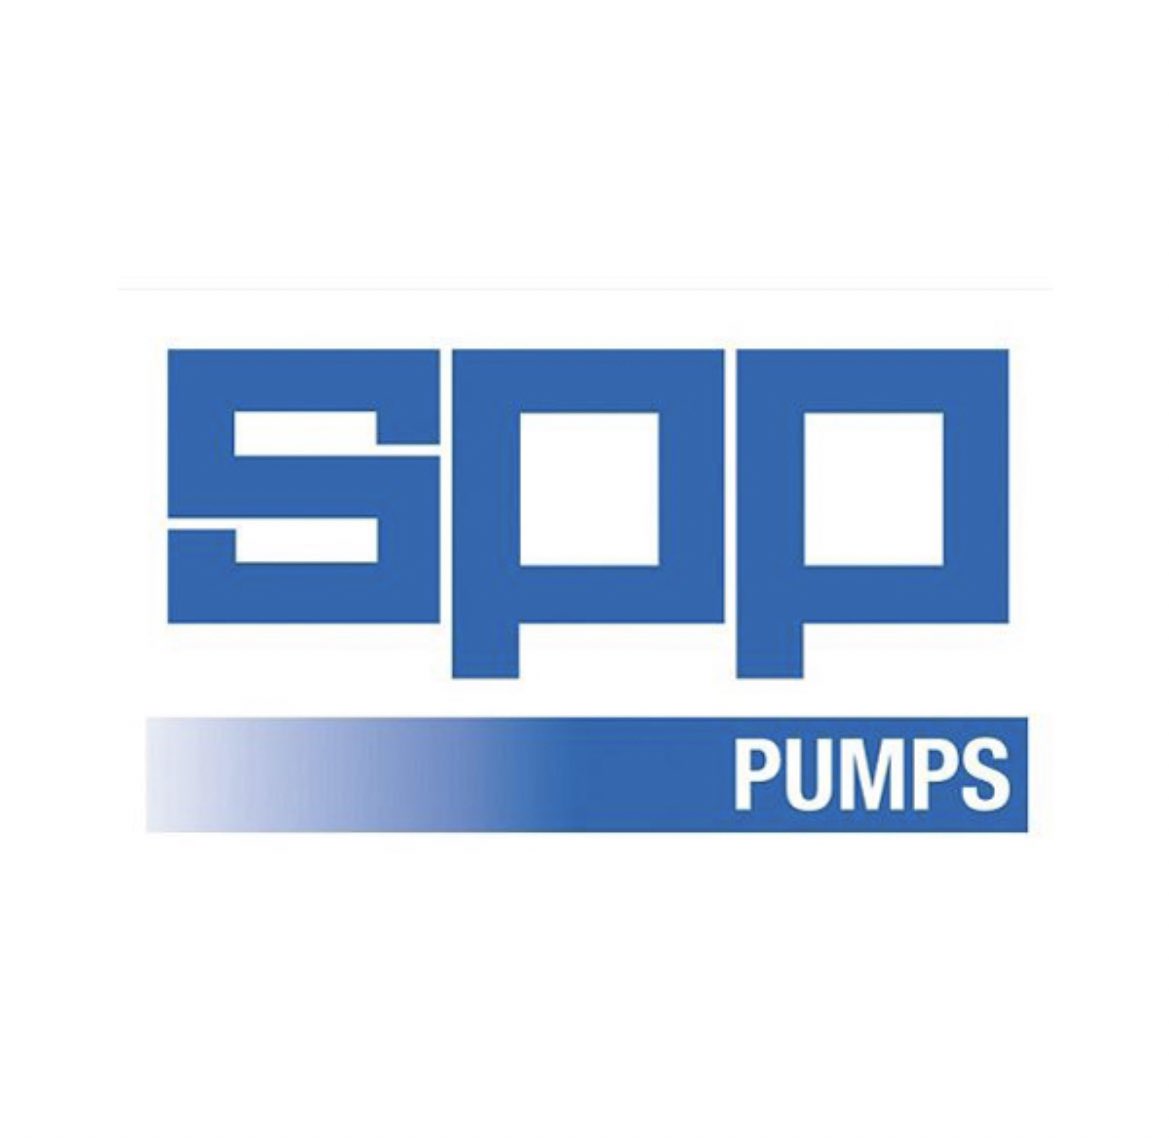 ⚽️⚽️MIDWEEK FIXTURES⚽️⚽️ 

After the 1st team loss to Rockleaze on the weekend we welcome @RHRFC in our midweek derby! 

Thank you to our sponsor SPP pumps for their continued support!

Bar open🍺

#upthewell